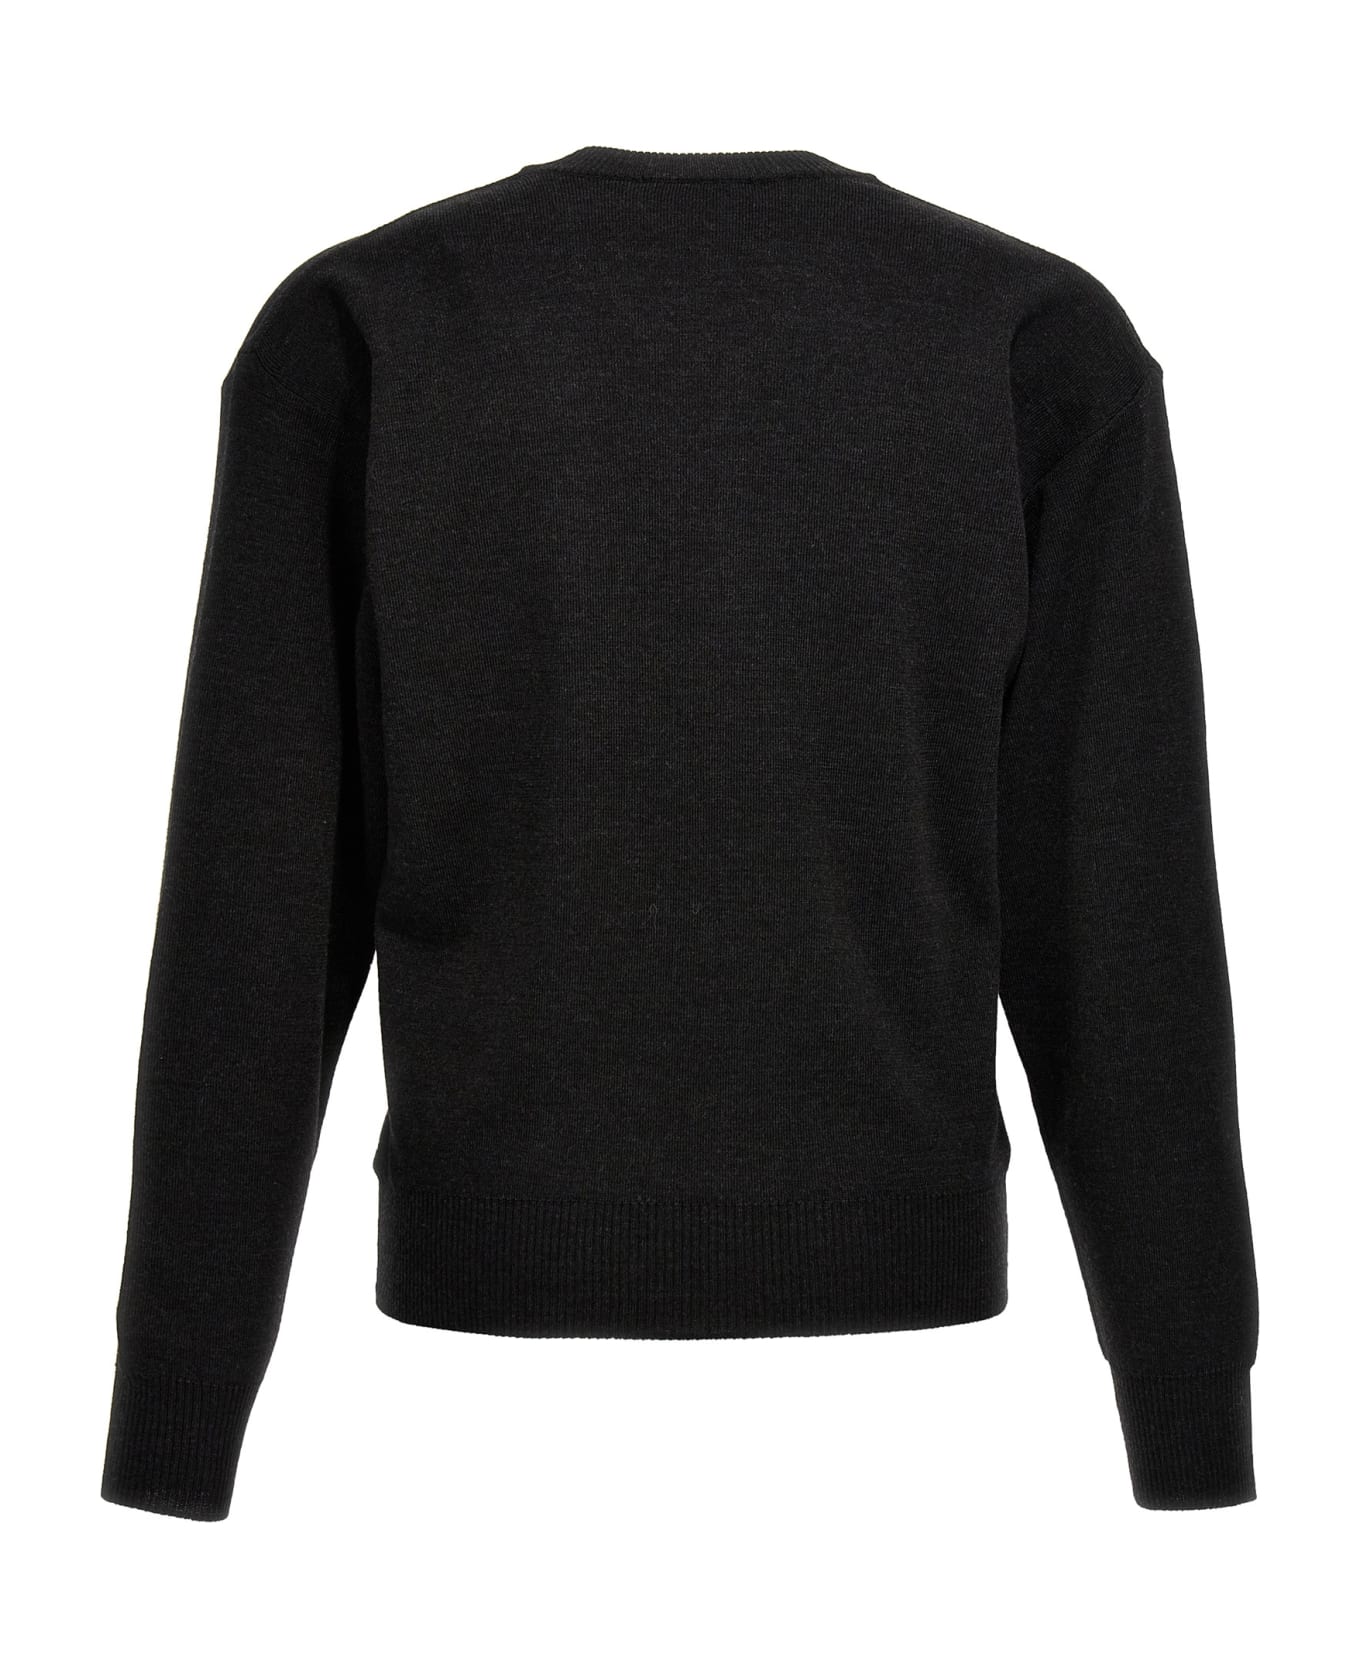 Lemaire V-neck Sweater - Antracite